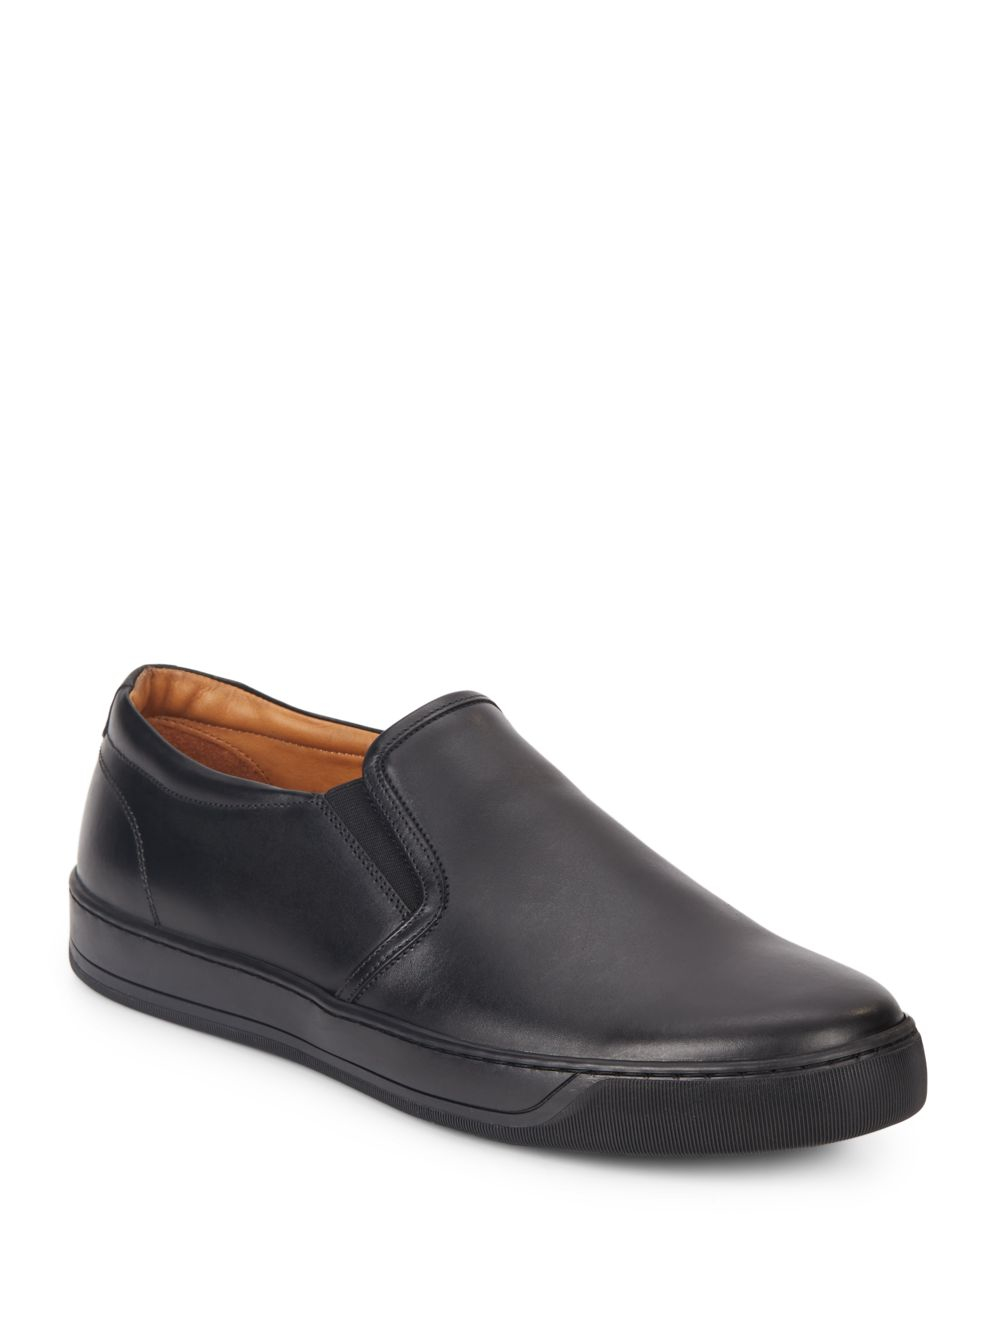 Bruno magli Wimpy Leather Slip-on Sneakers in Black for Men | Lyst